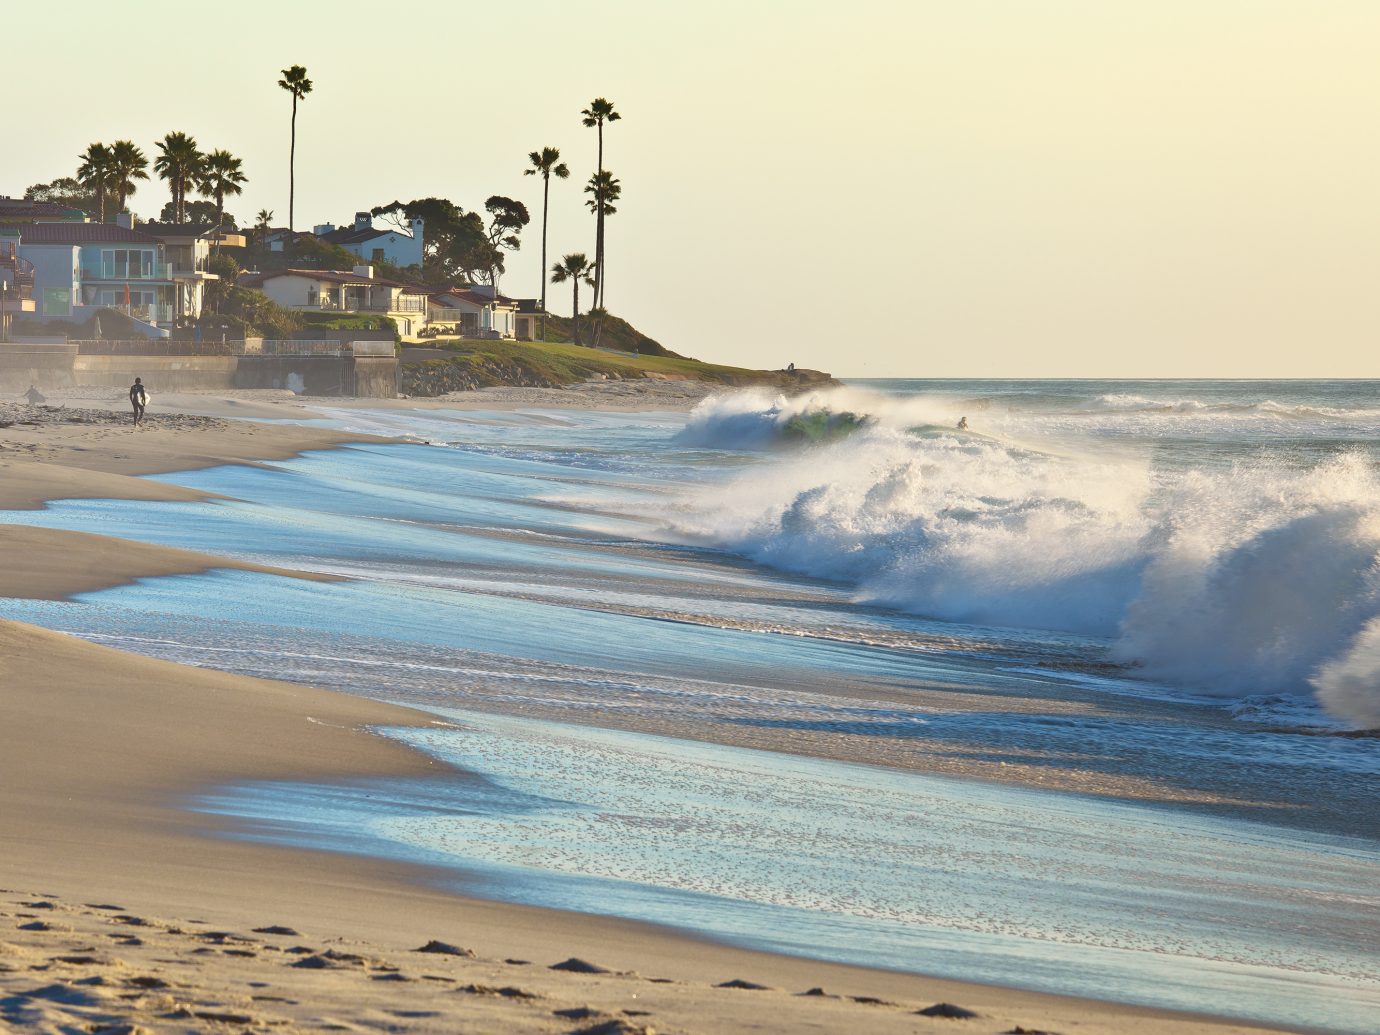 San Diego California beaches are known for their beauty.